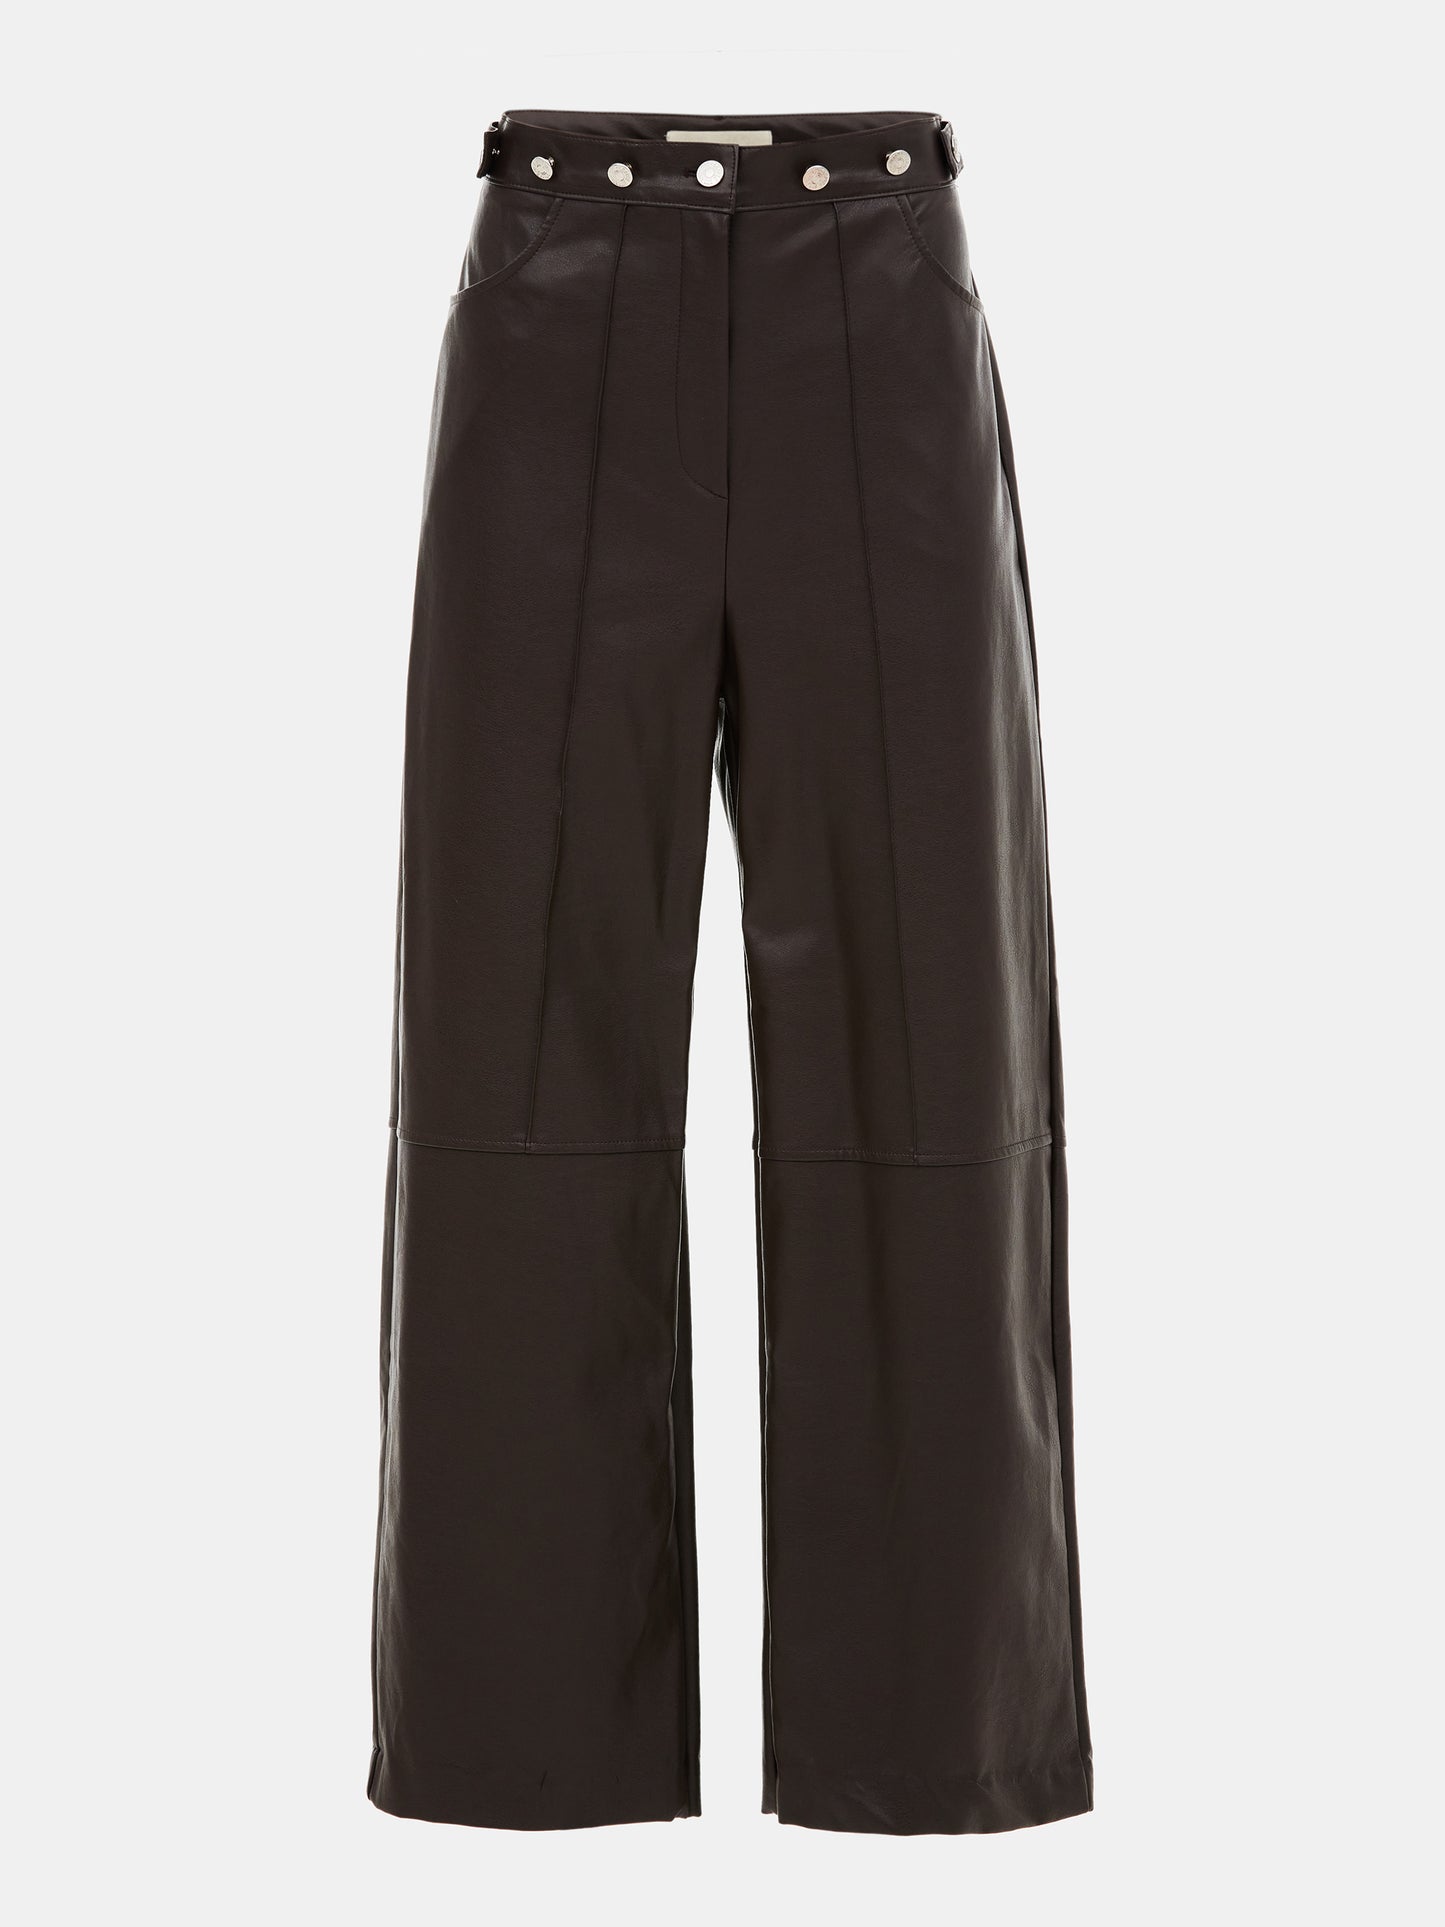 Buttoned Faux Leather Pants, Dark Chocolate